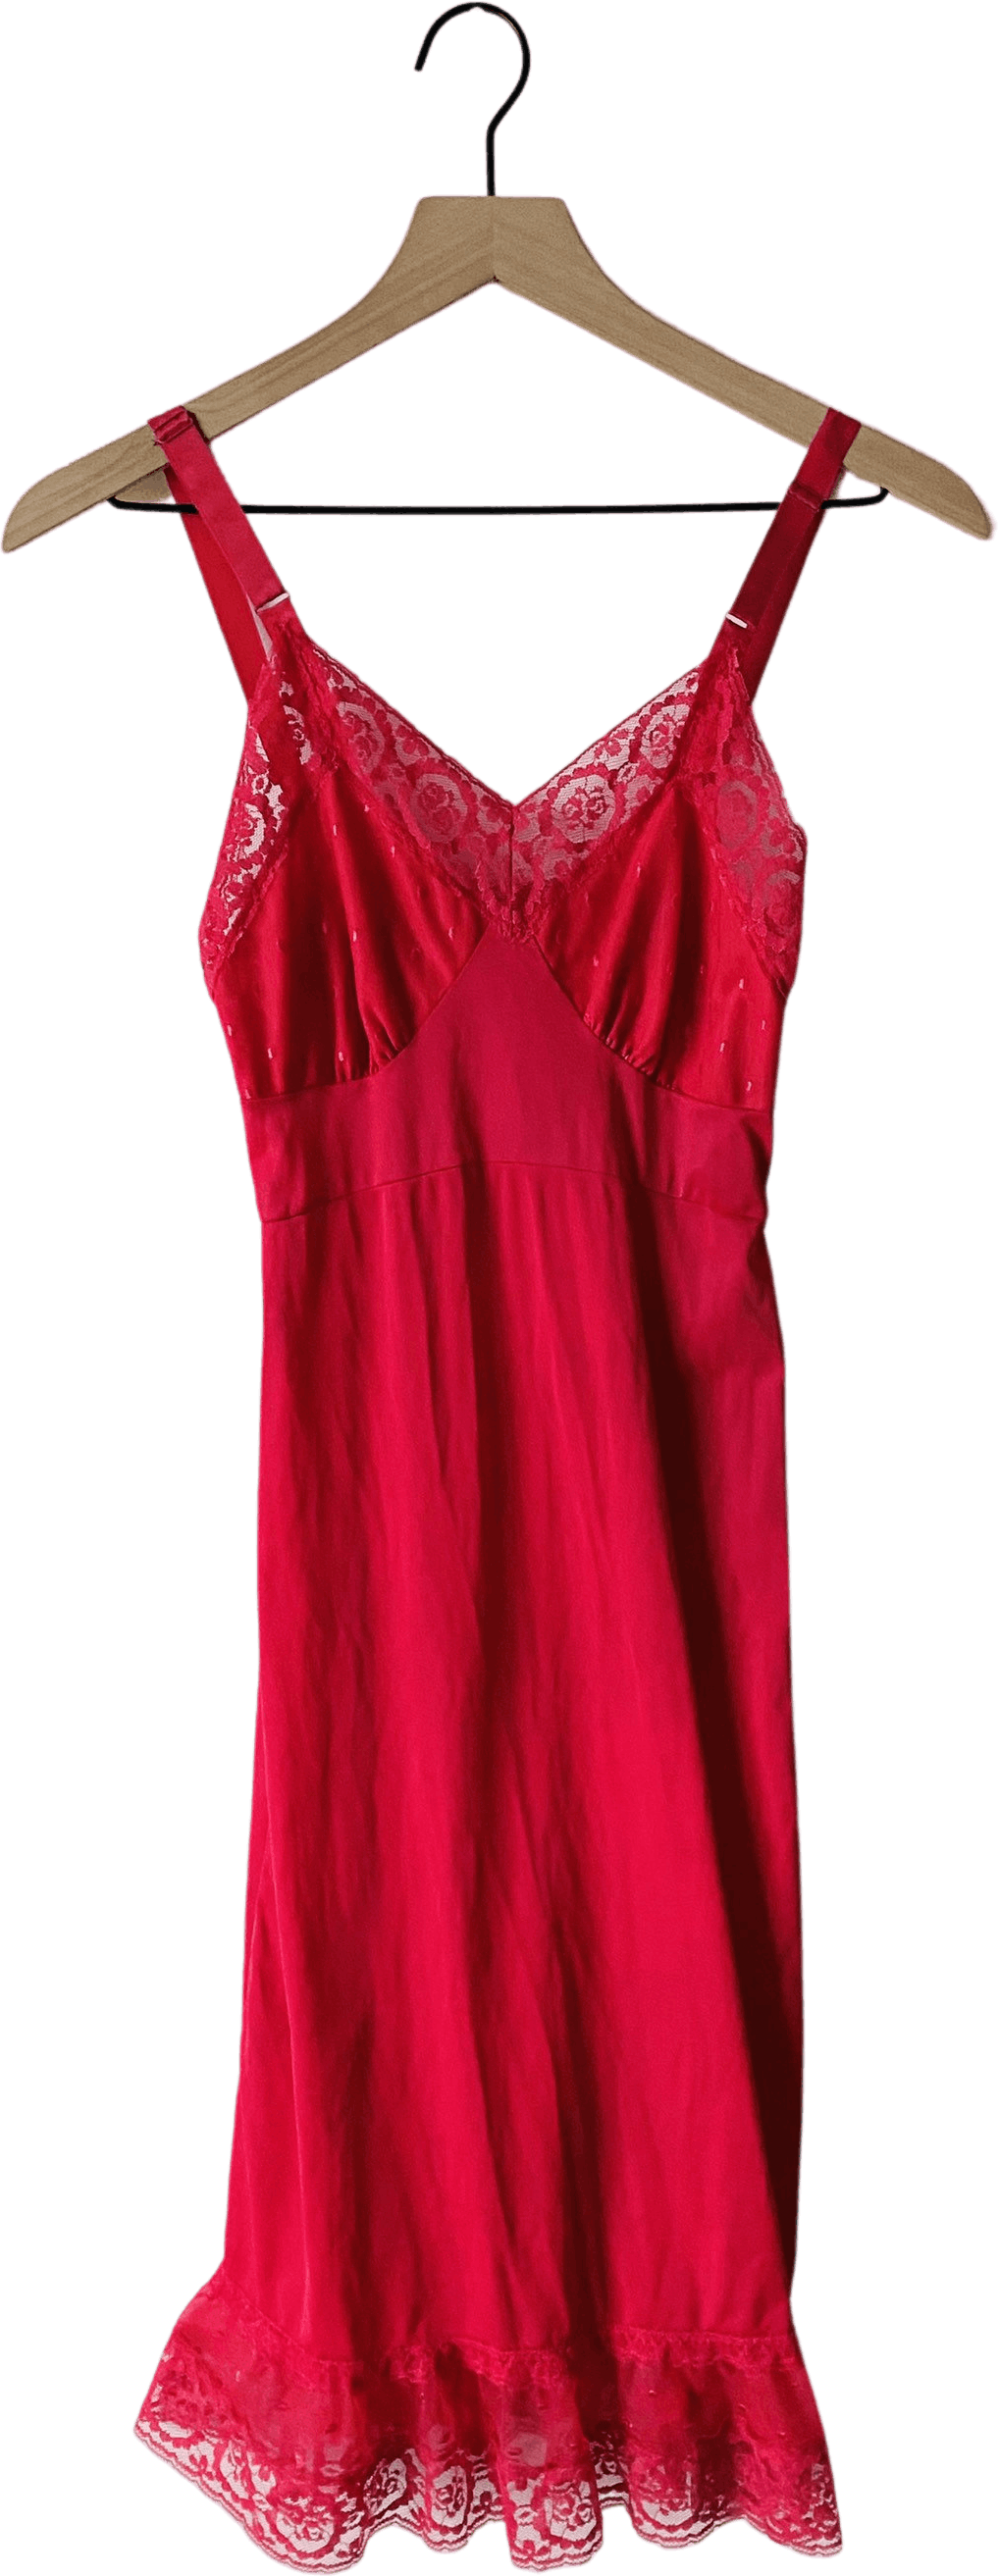 Vintage 70's Red Ruffle Slip Dress by Philmaid | Shop THRILLING